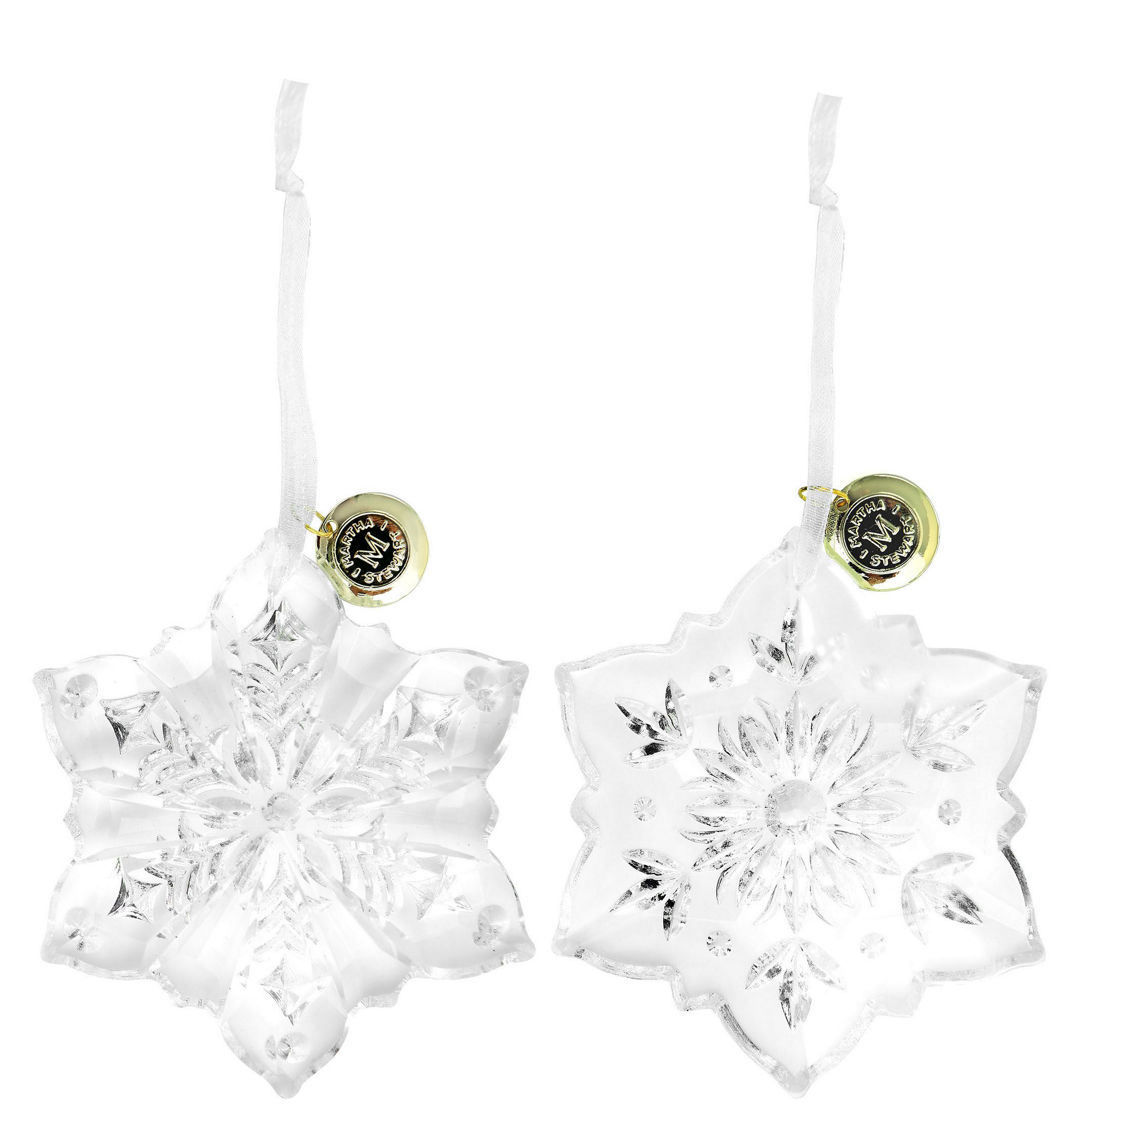 Martha Stewart Holiday Crystal Snowflake 4 Piece Ornament Set in Clear - Image 2 of 5